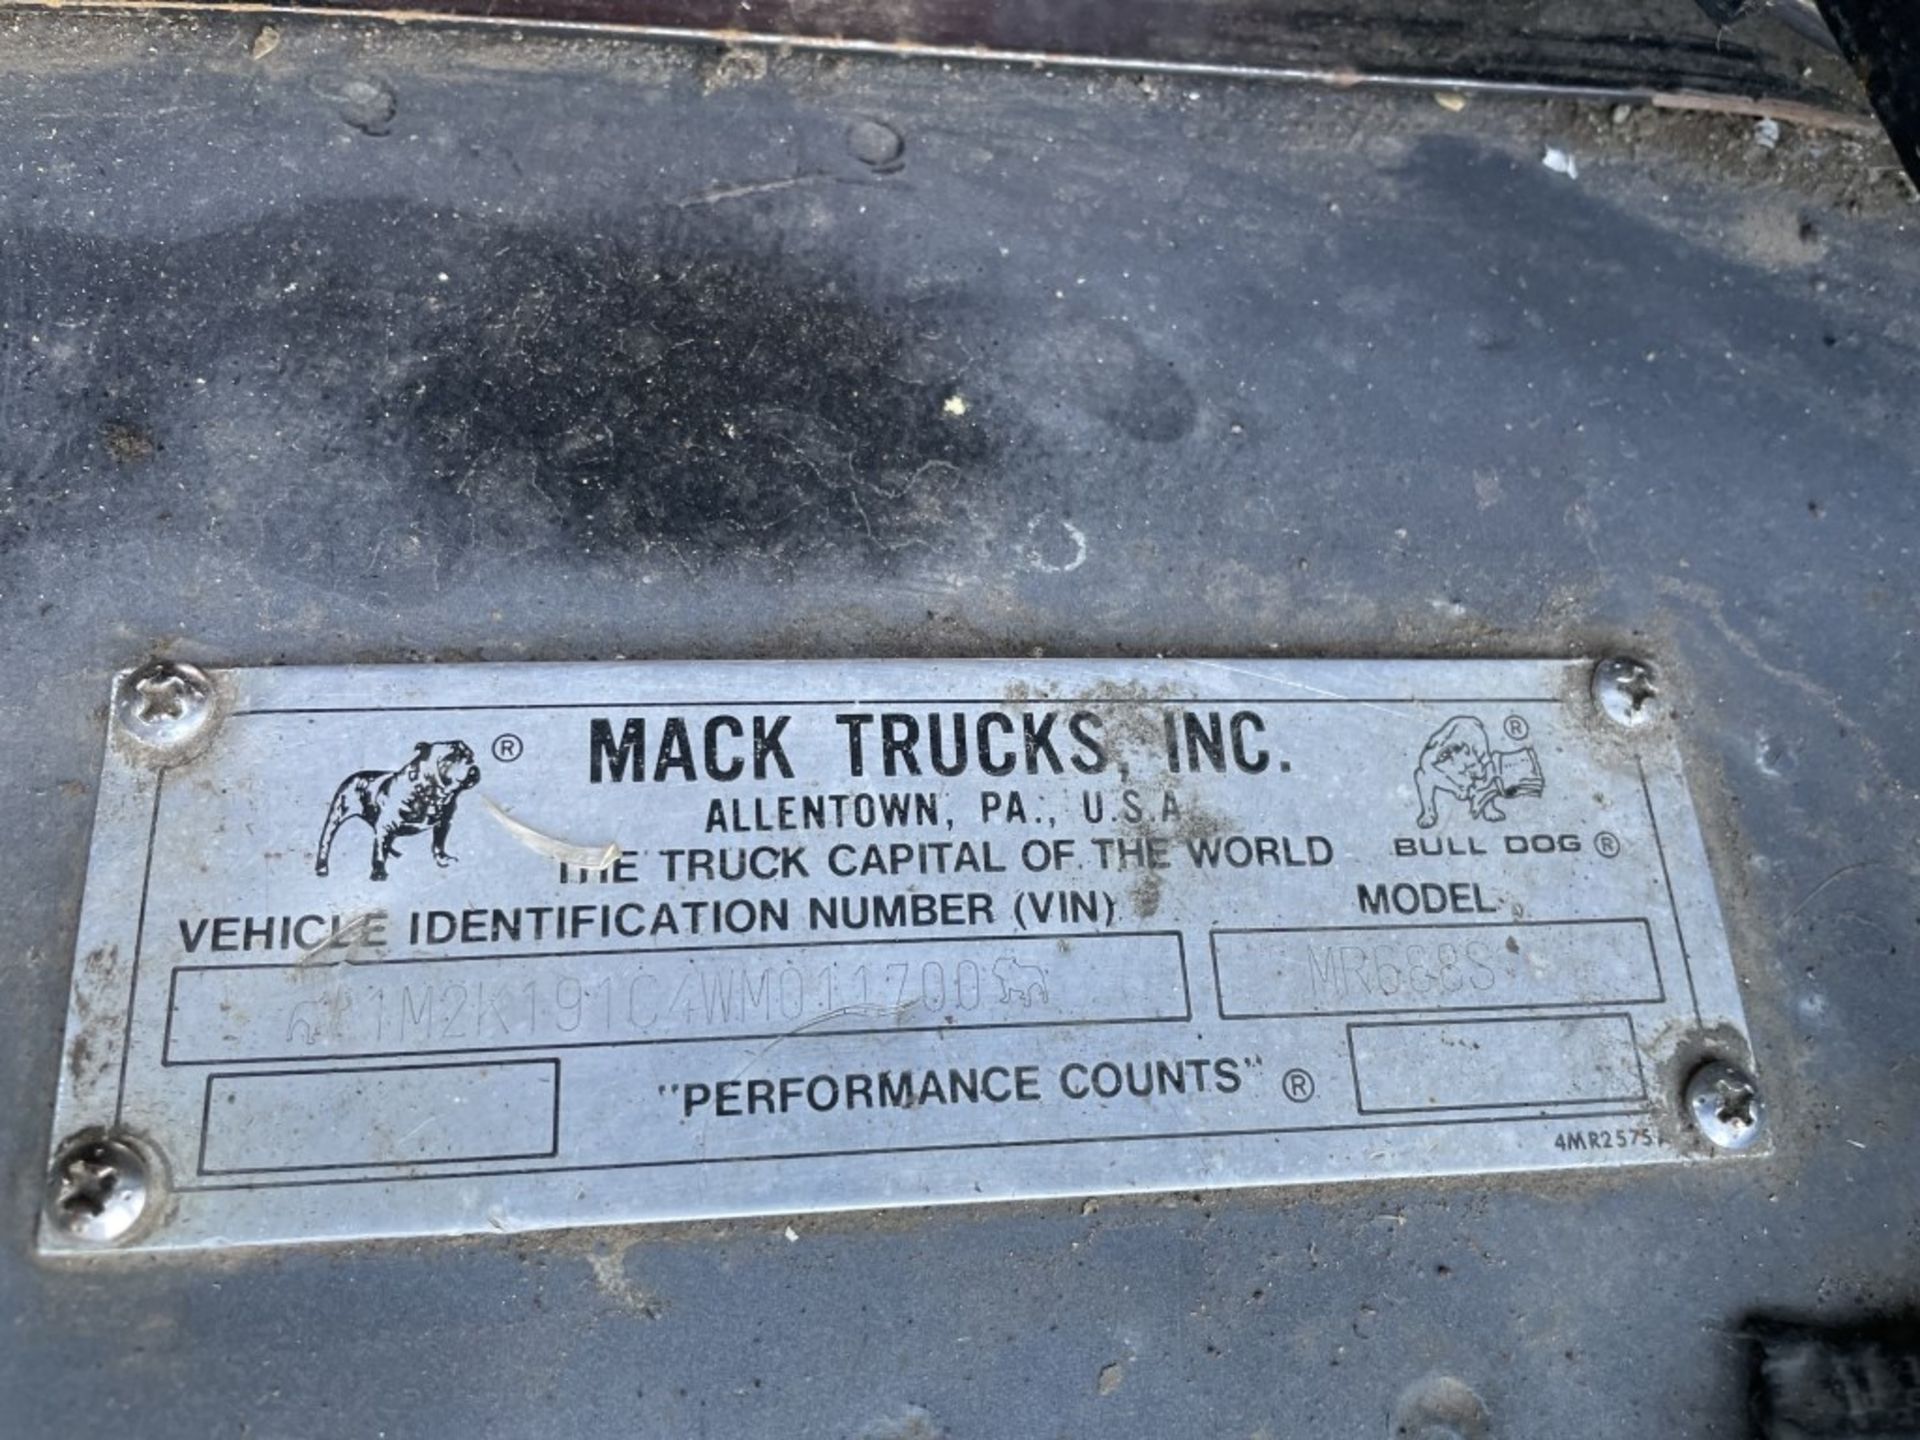 1998 Mack MR688S T/A Cab Over Refuse truck - Image 23 of 34